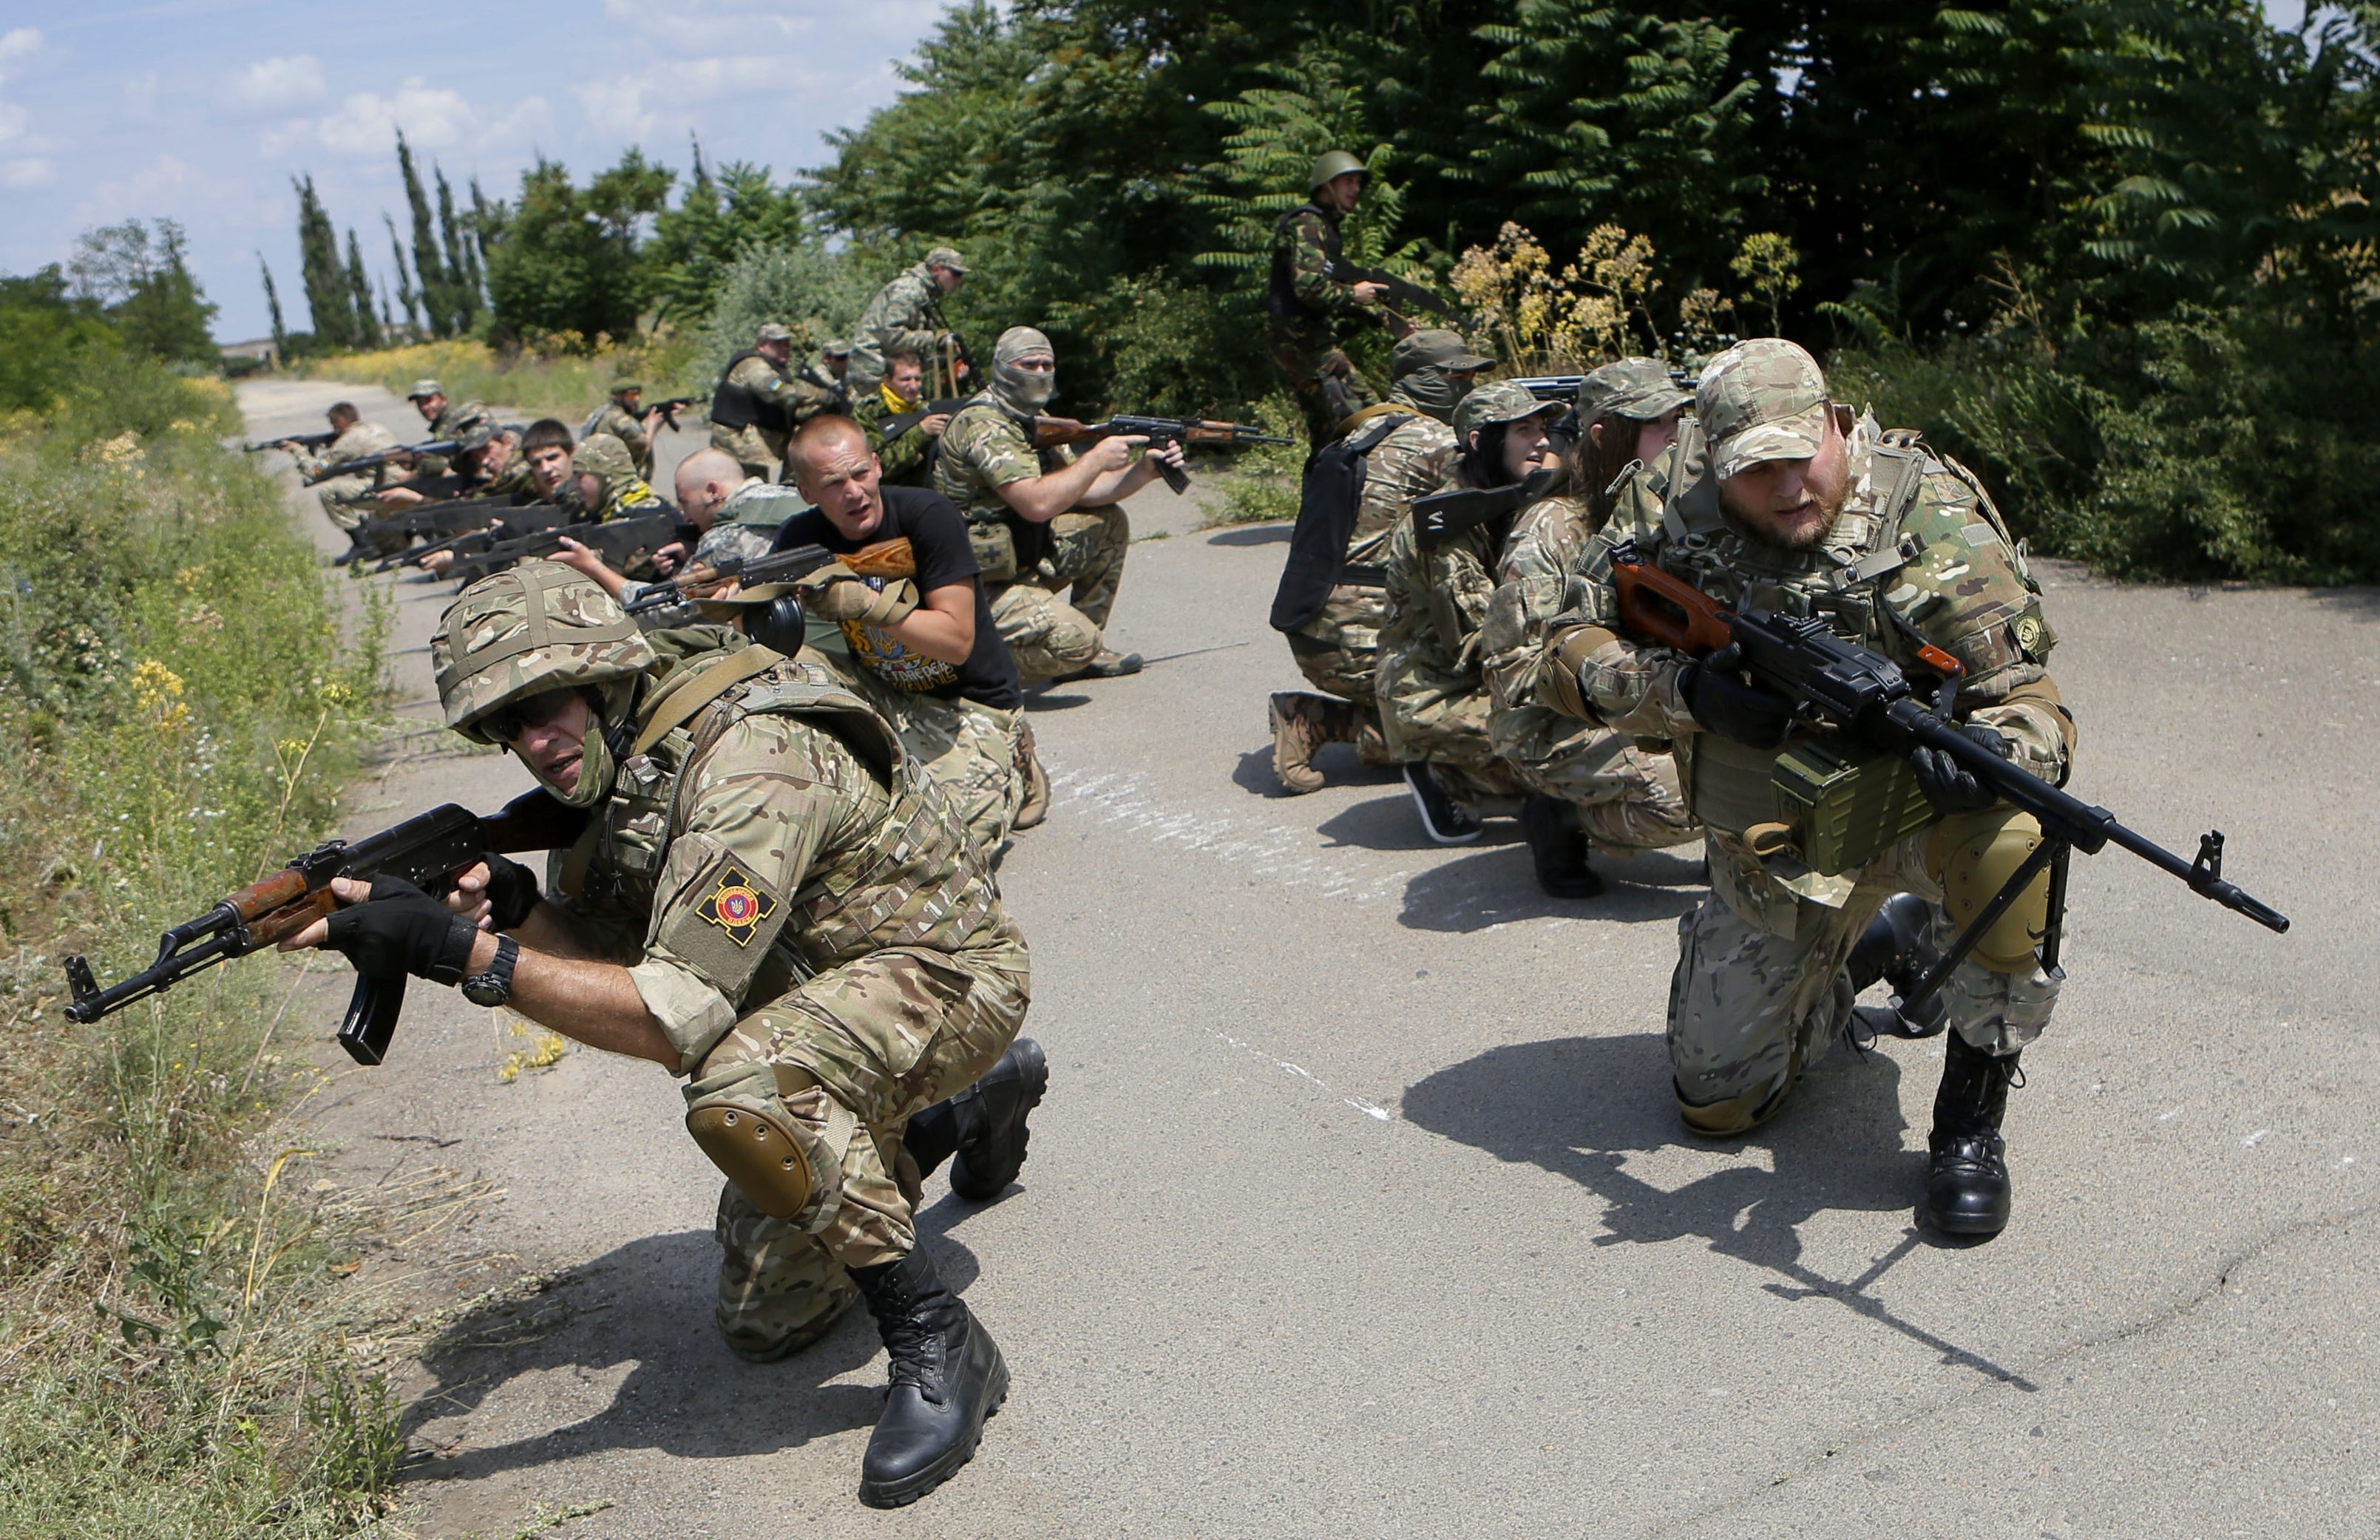 Ukrainian troops. Фото с фронта Украины. Location of the Military Forces of Ukraine. Ukraine Troops in School. SAS Troops Training local Forces in Ukraine’.